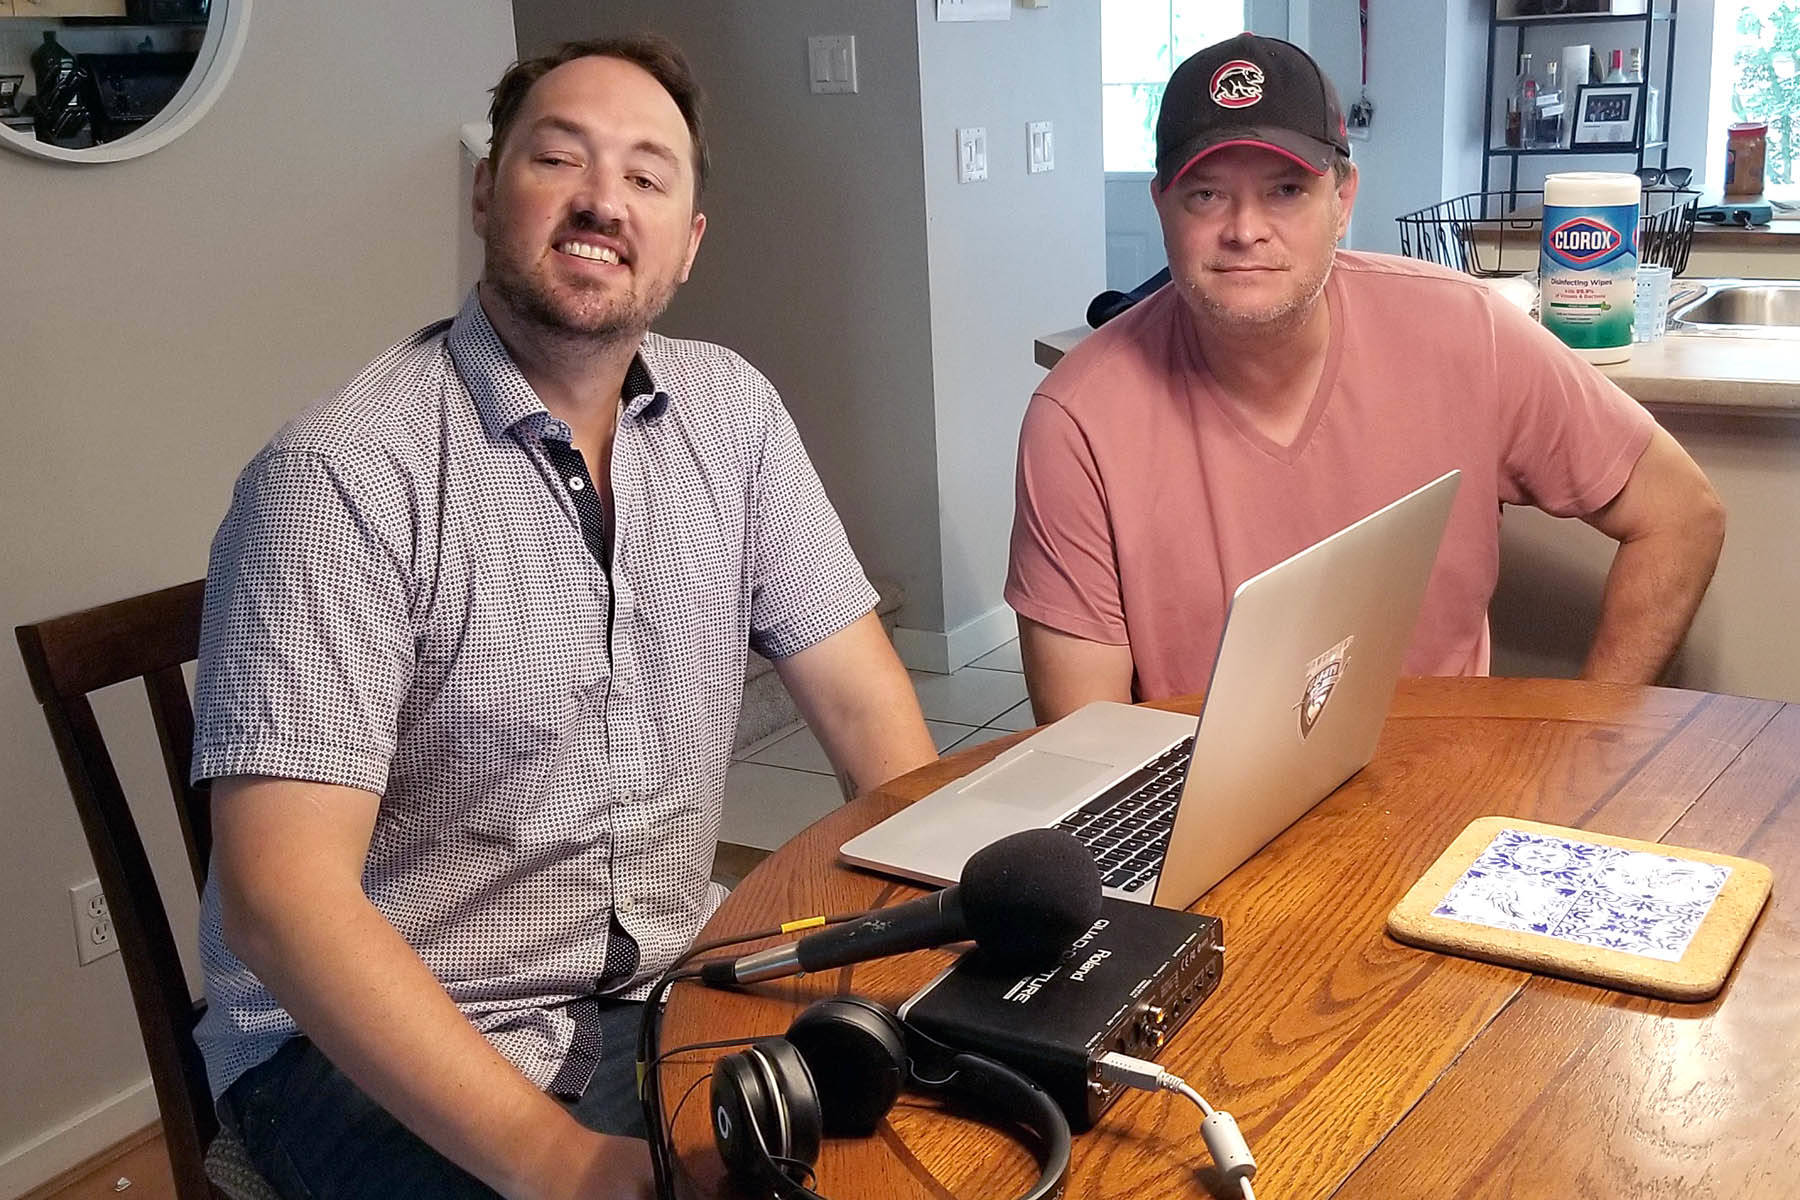 Vancouver Giants play-by-play broadcaster Dan O’Connor (left) and former Surrey Eagles head coach Mark Holick (right) have started a new sports podcast, The Voice & The Coach. The pair are longtime friends and former colleagues with the Prince George Cougars. (Nick Greenizan photo)